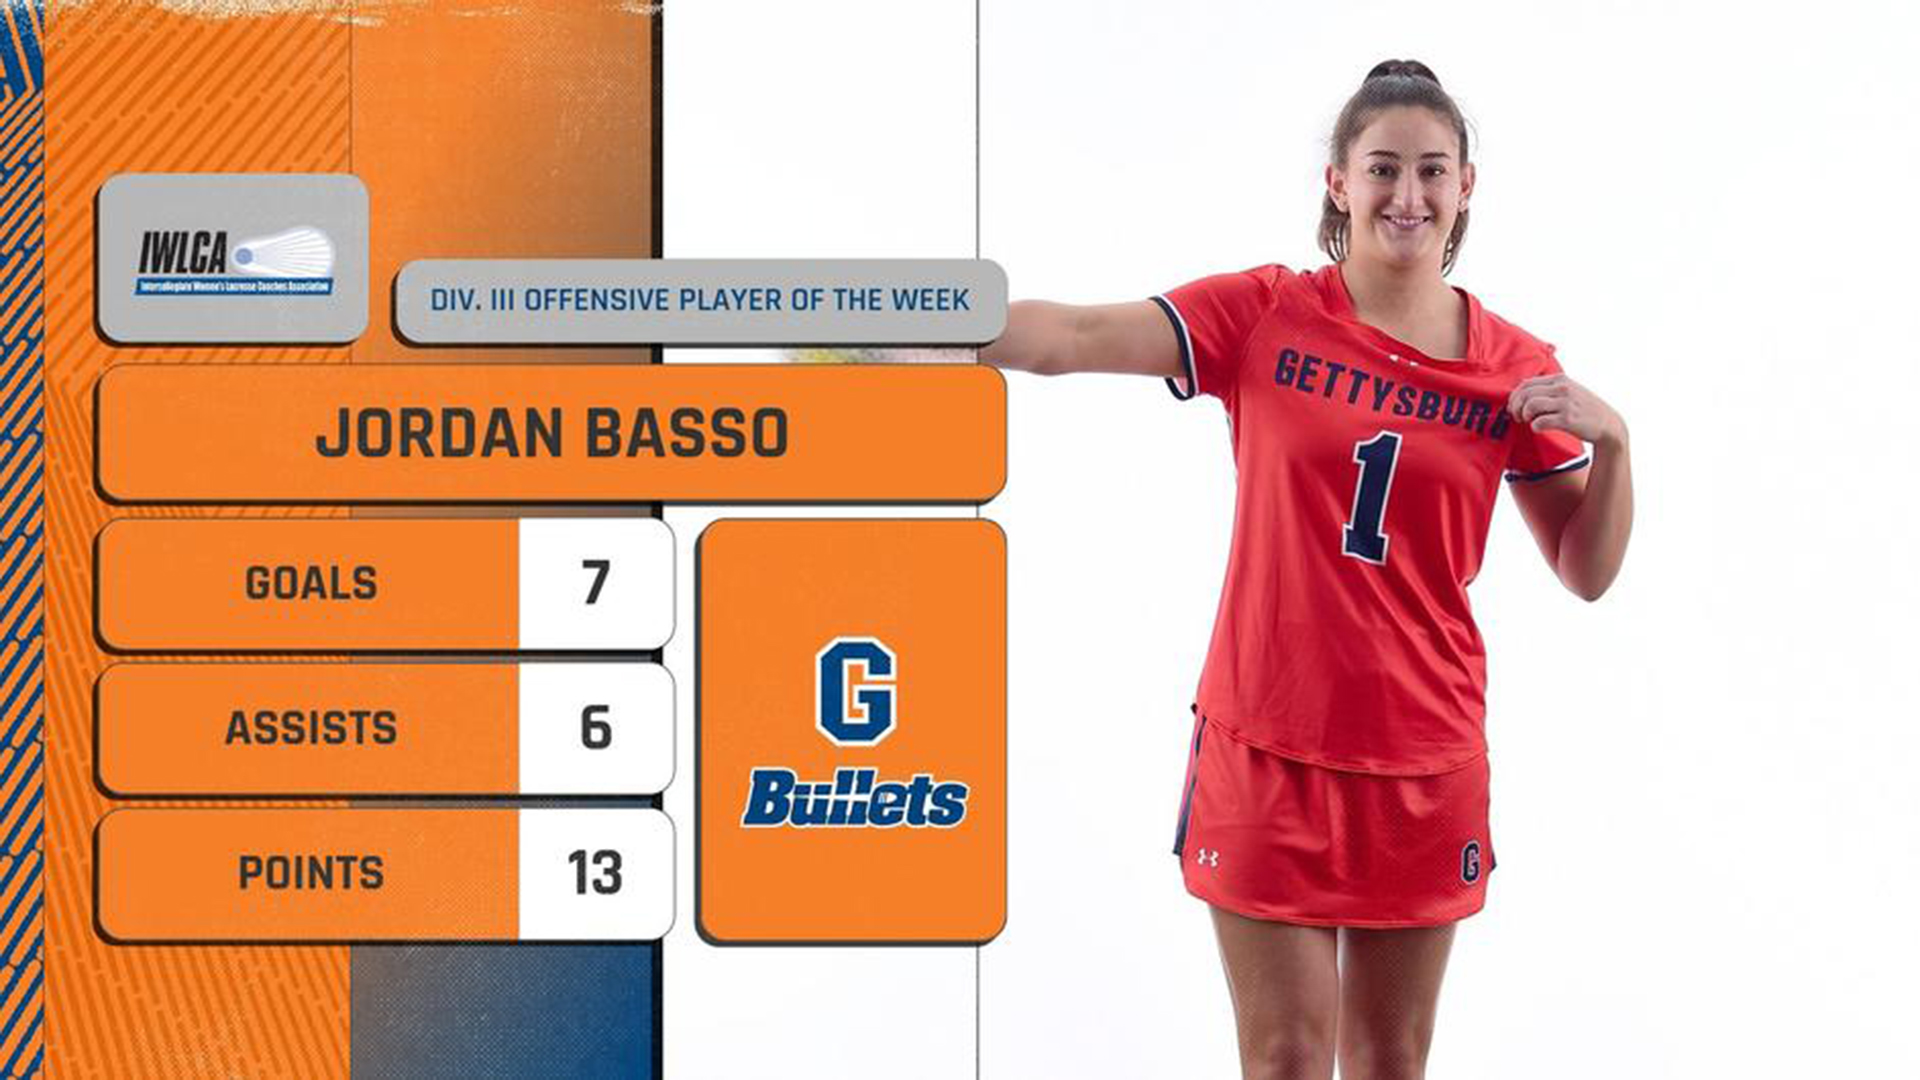 Basso Named IWLCA National Offensive Player of the Week